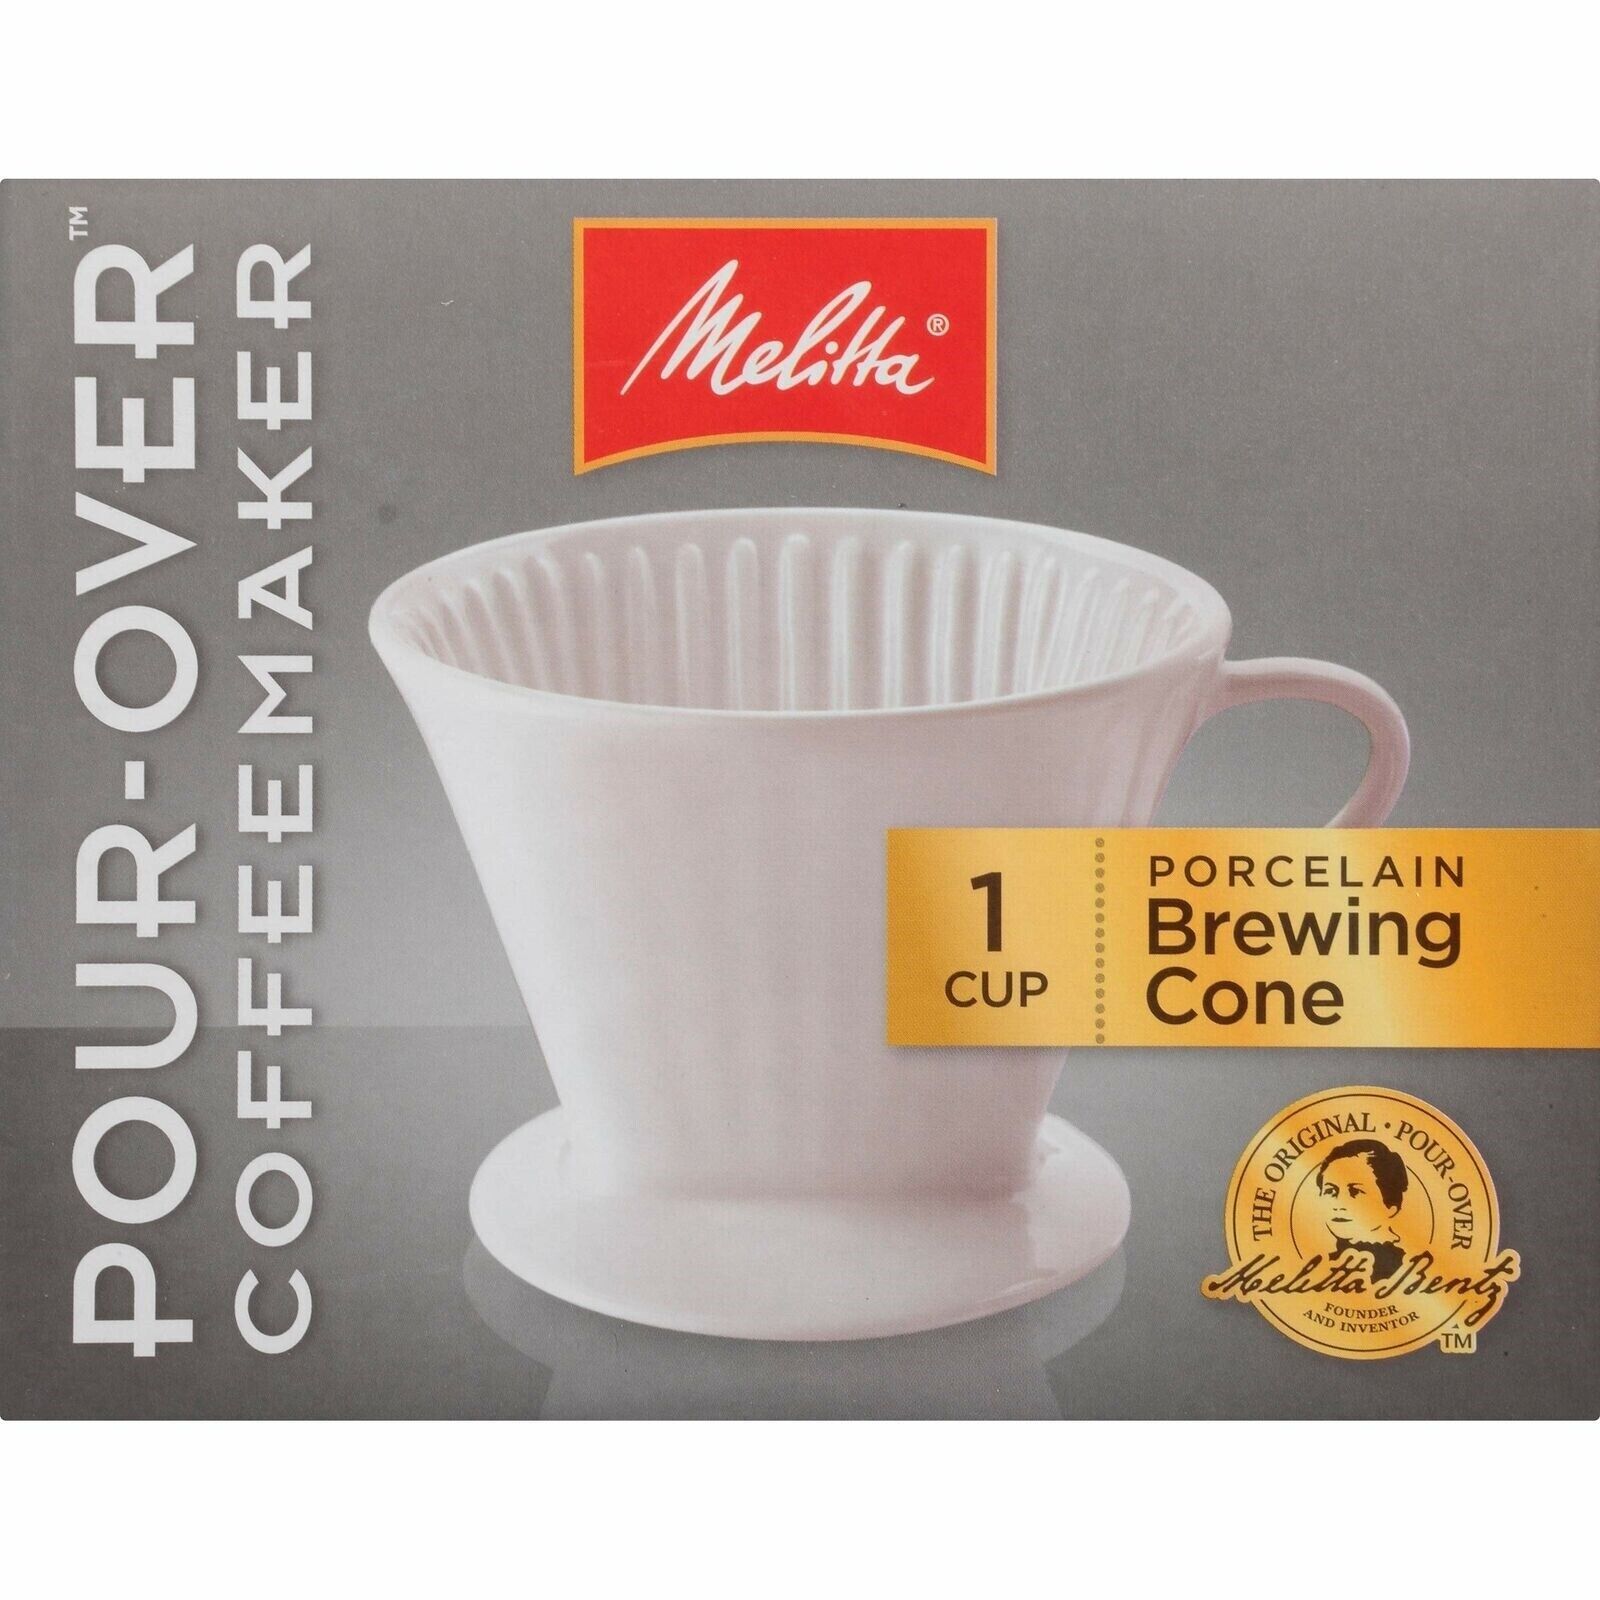 Melitta Coffee Makers Pour-Over Coffee Brewer Cone, Porcelain 1 cup - $23.08